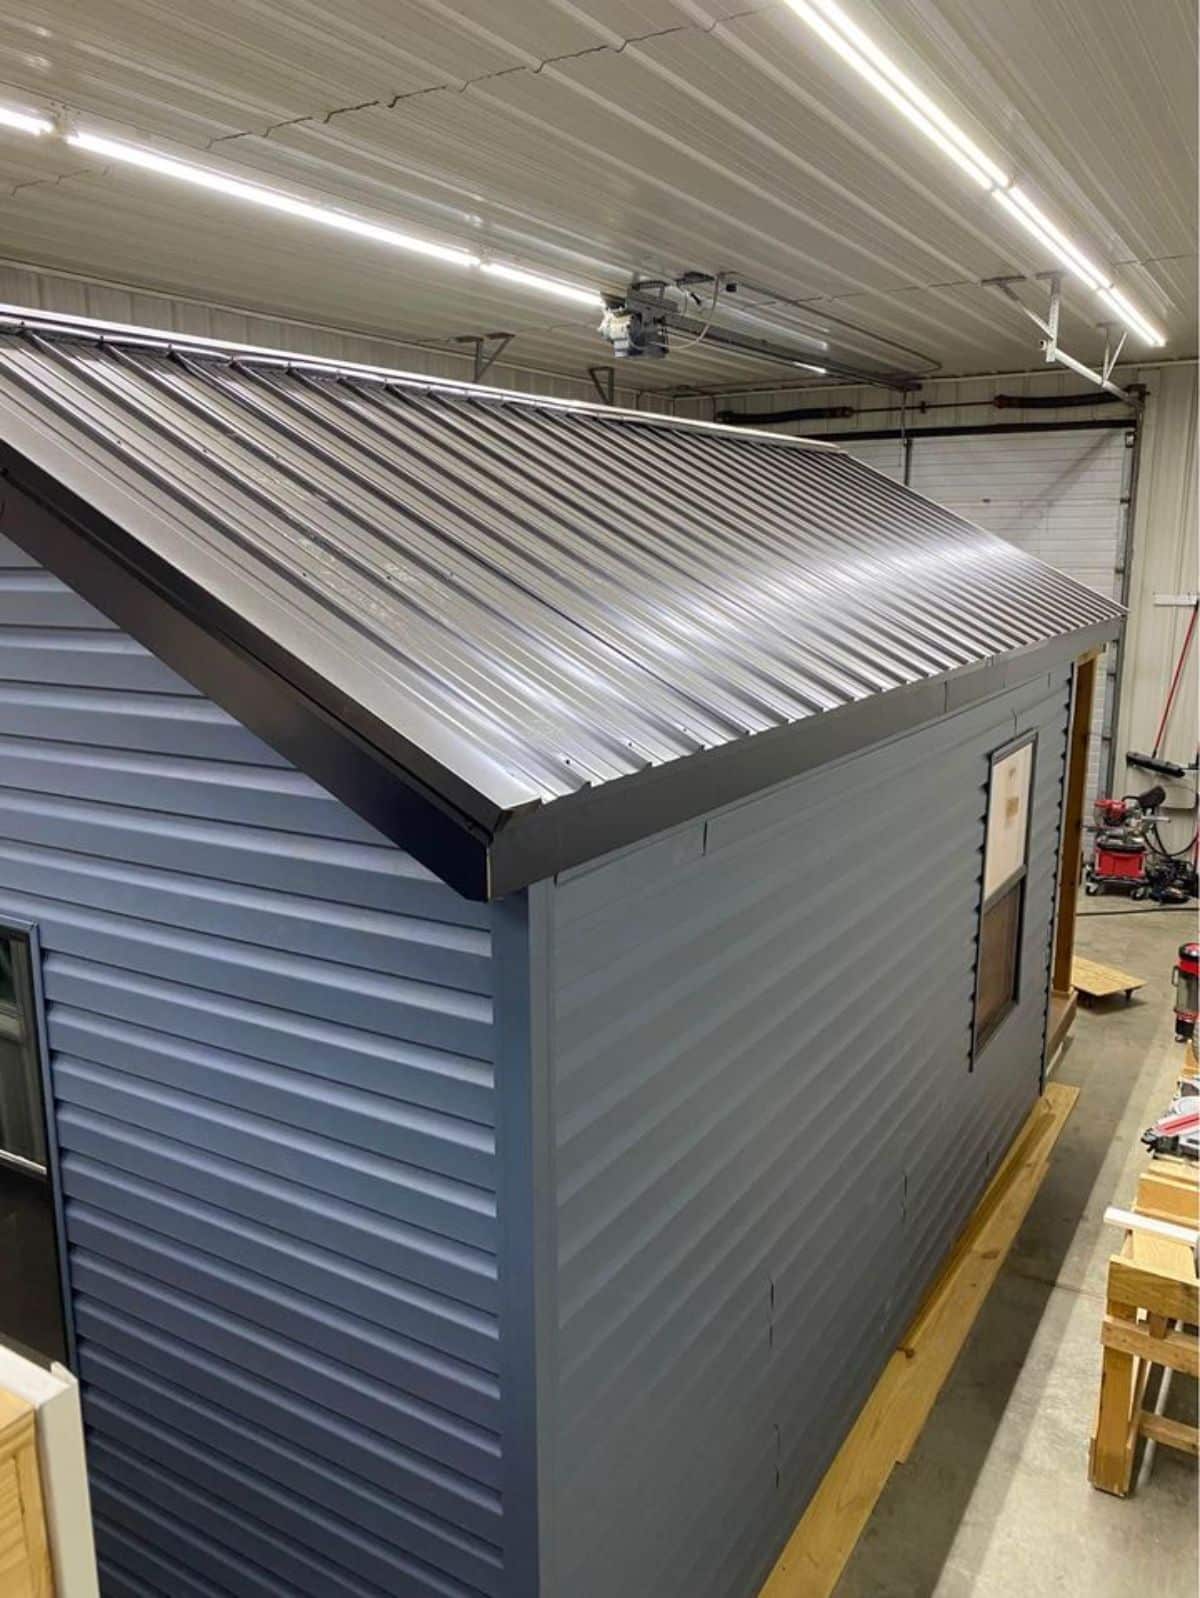 Blue steel roof and outer walls of 20' Budget Friendly Tiny House